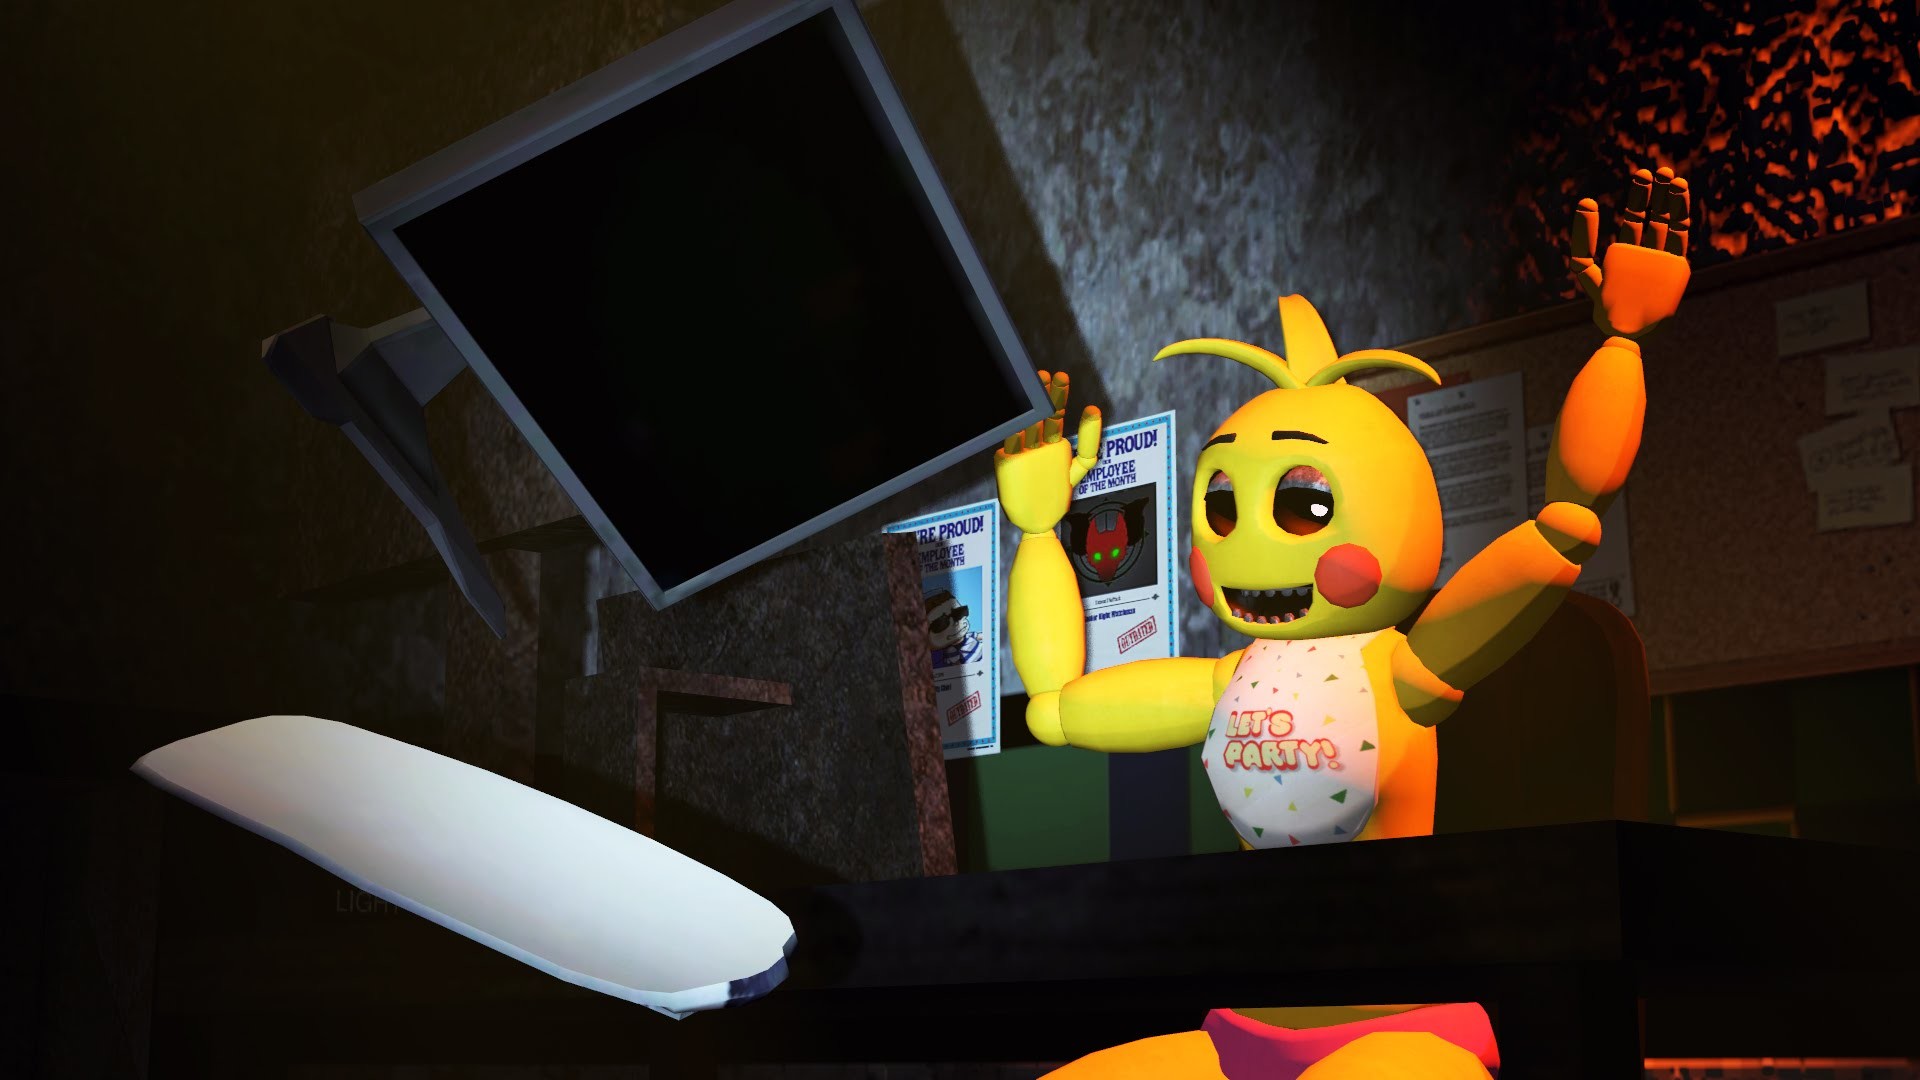 1920x1080 [SFM FNAF2] Toy Chica Reacts to Five Night's at Freddy's 4 Teaser - YouTube